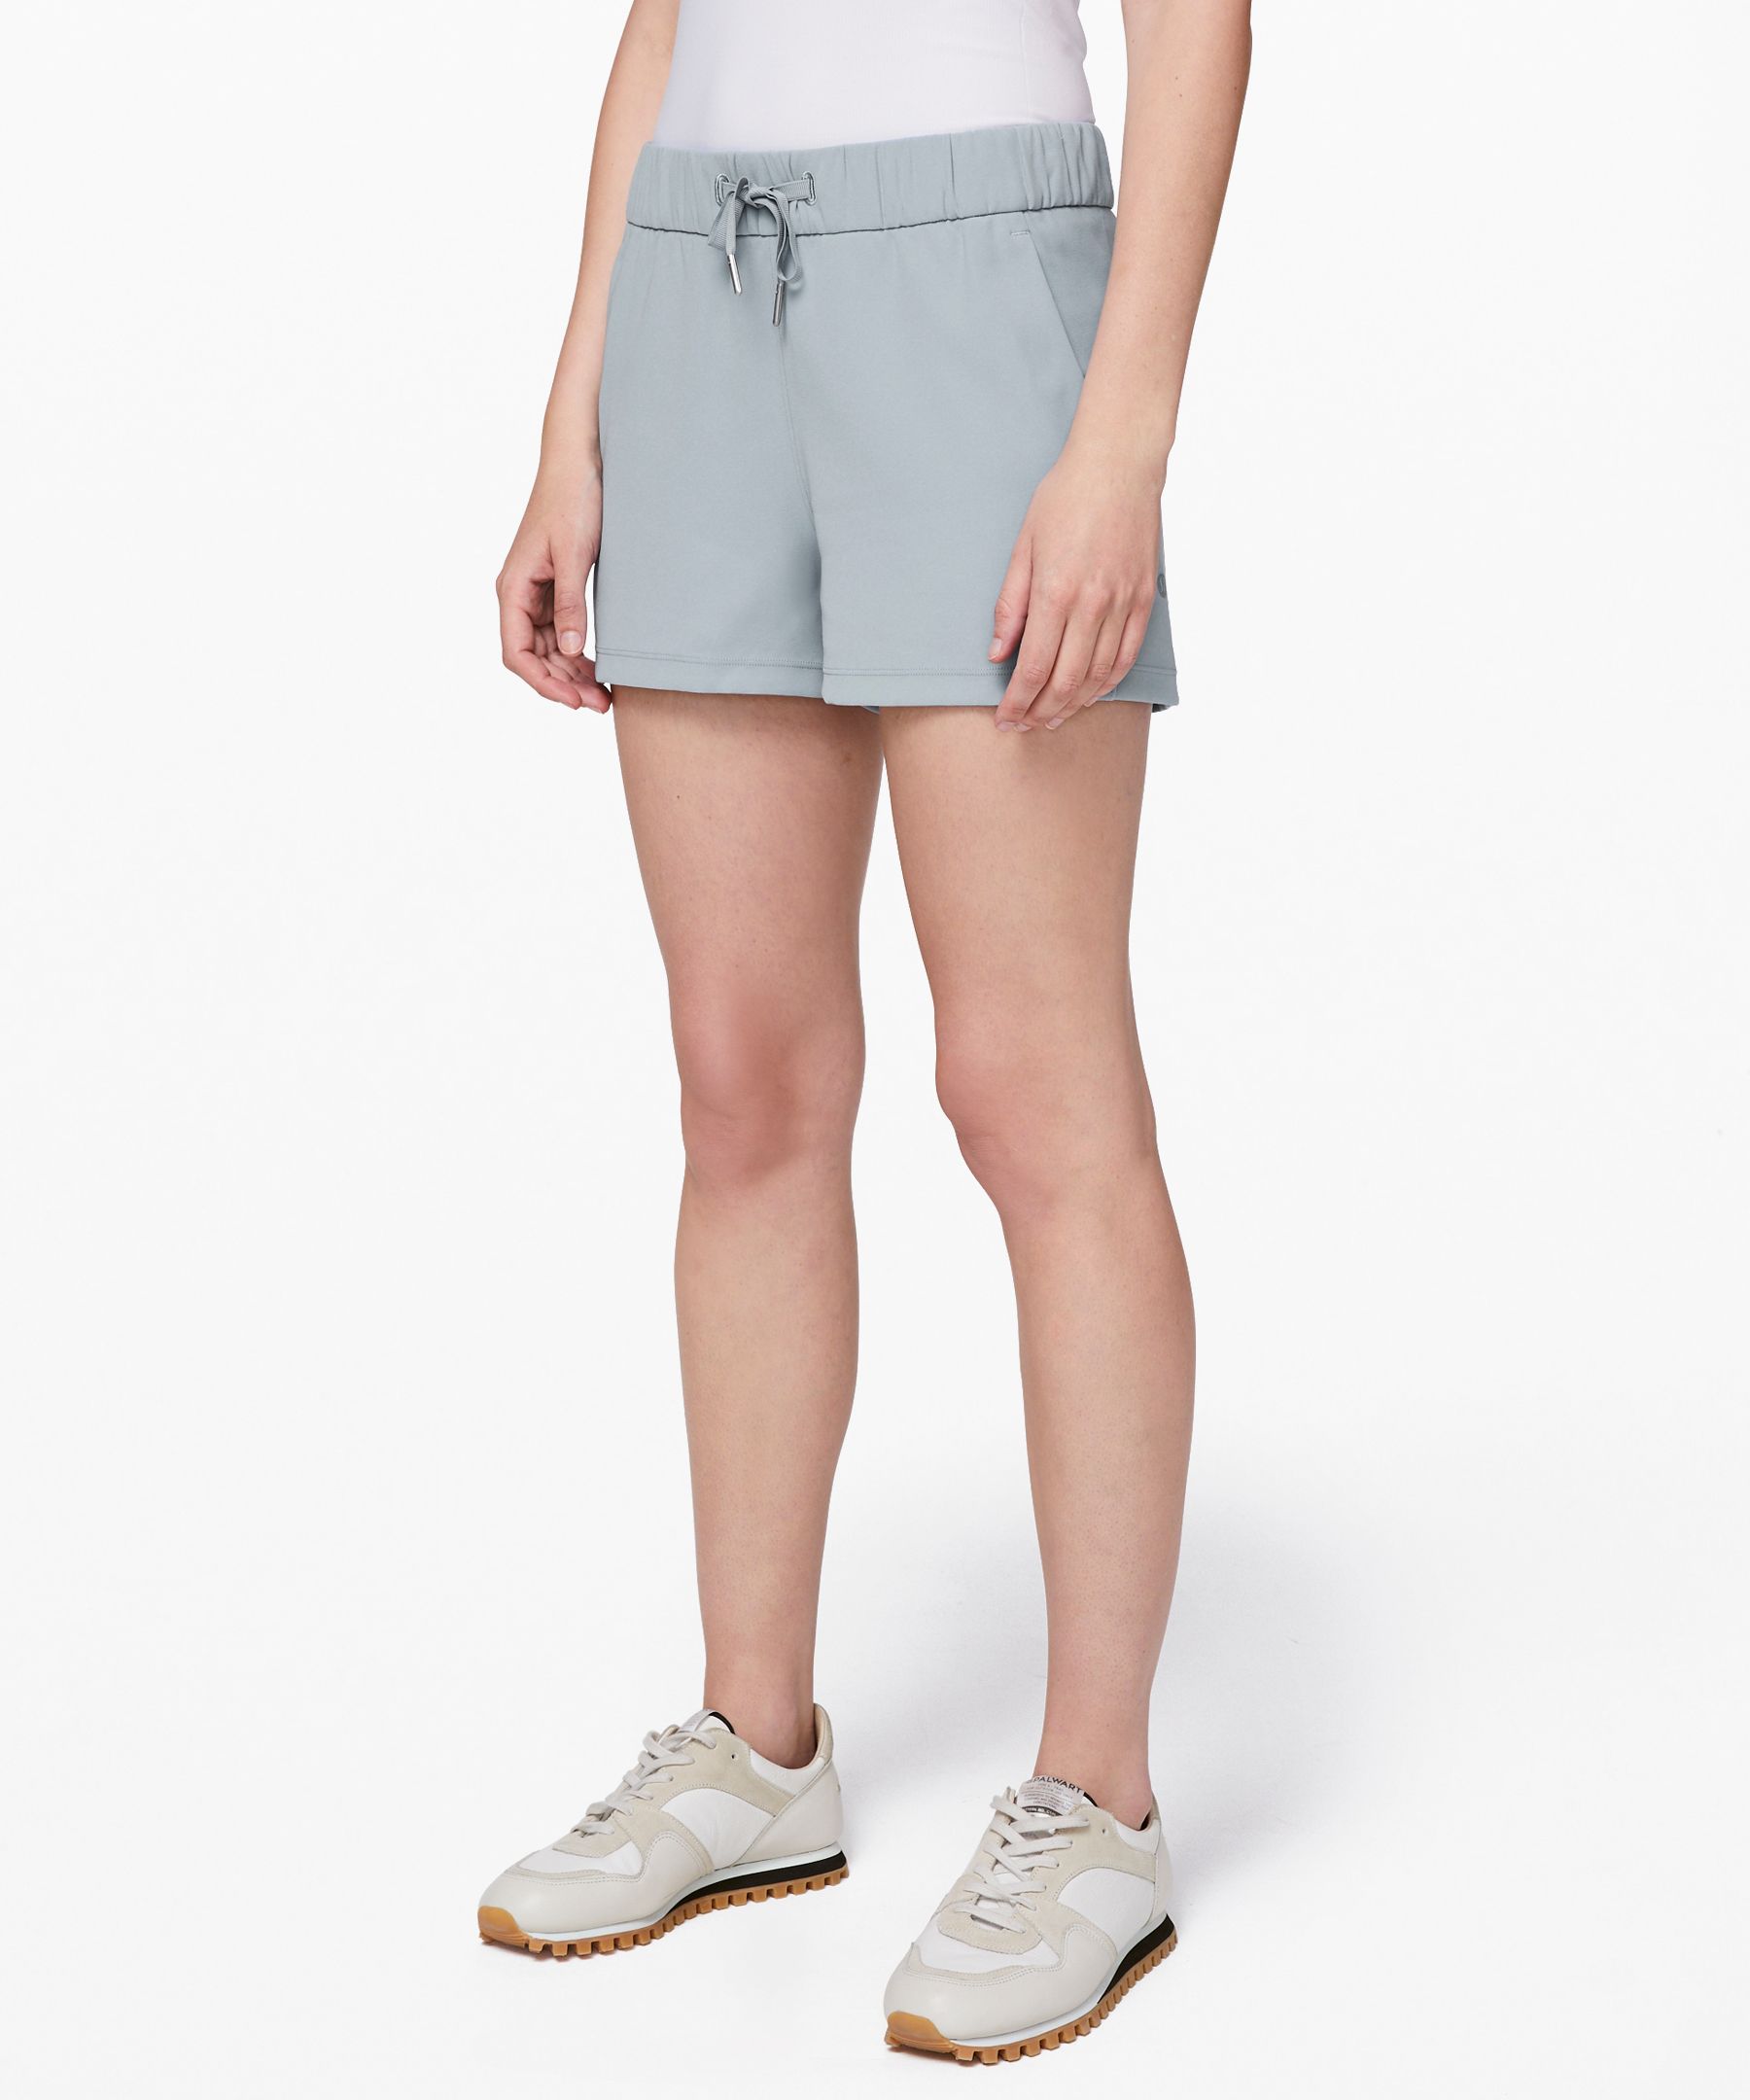 on the fly short woven